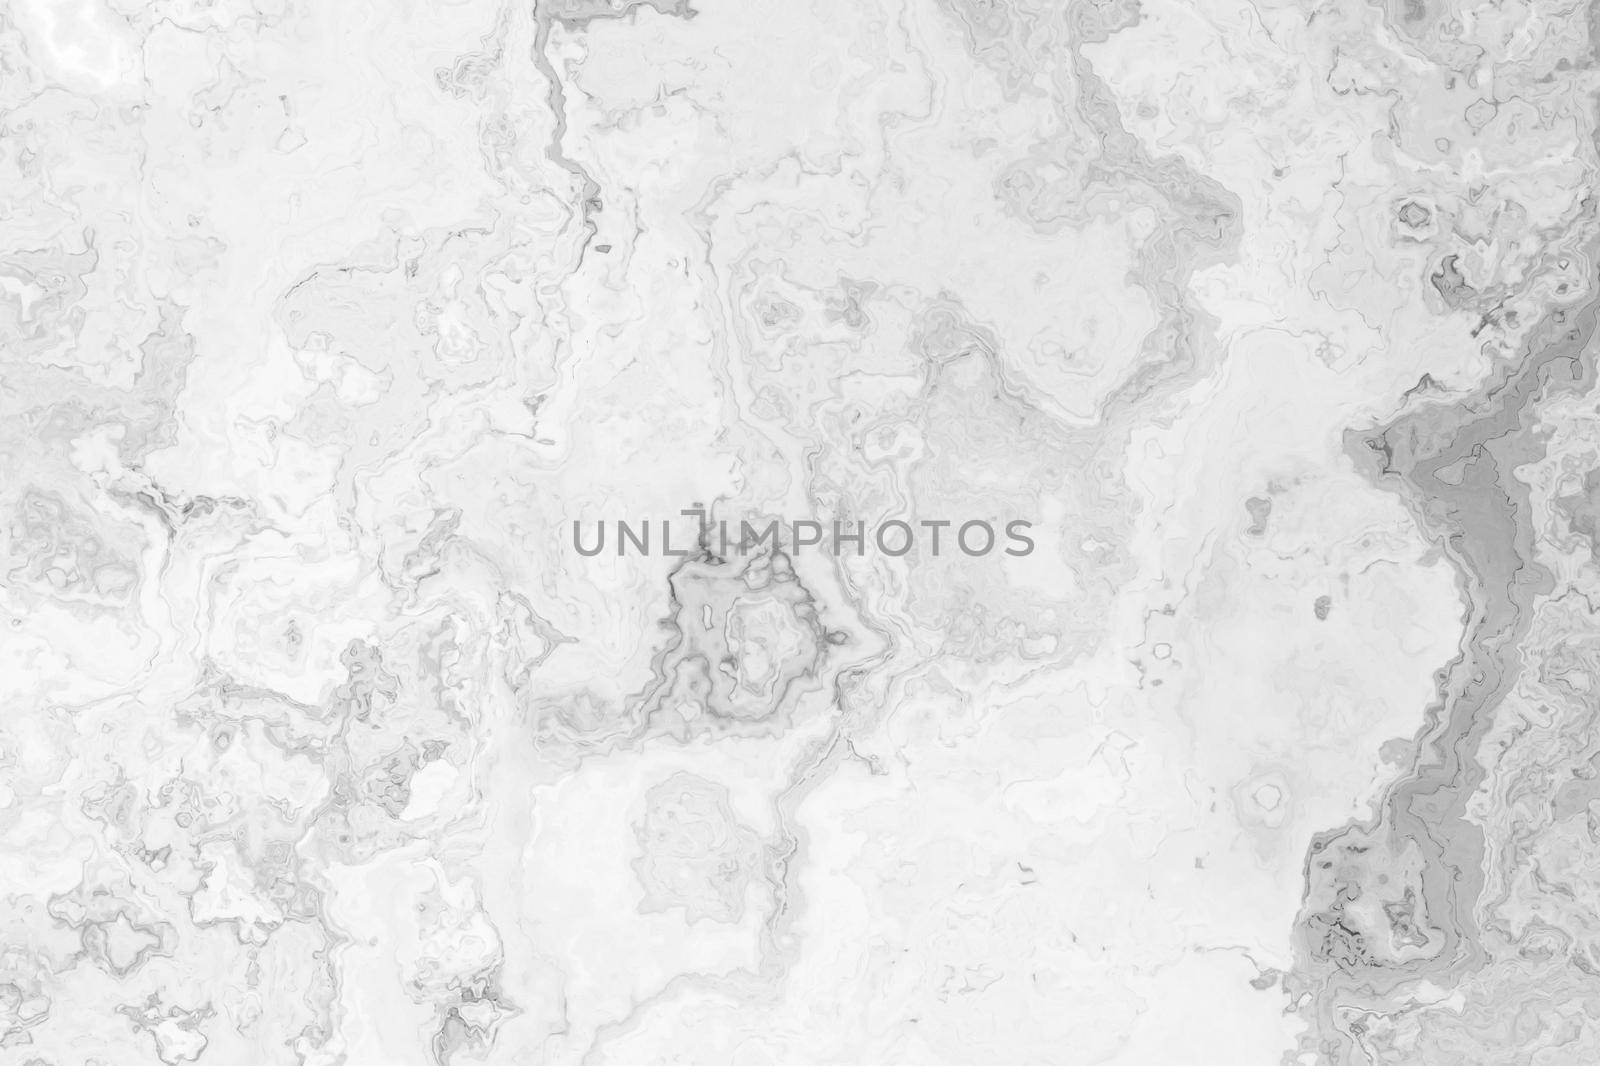 Different shades of grey color cloudy and wavy layout on solid sheet of wallpaper. Concept of home decor and interior designing